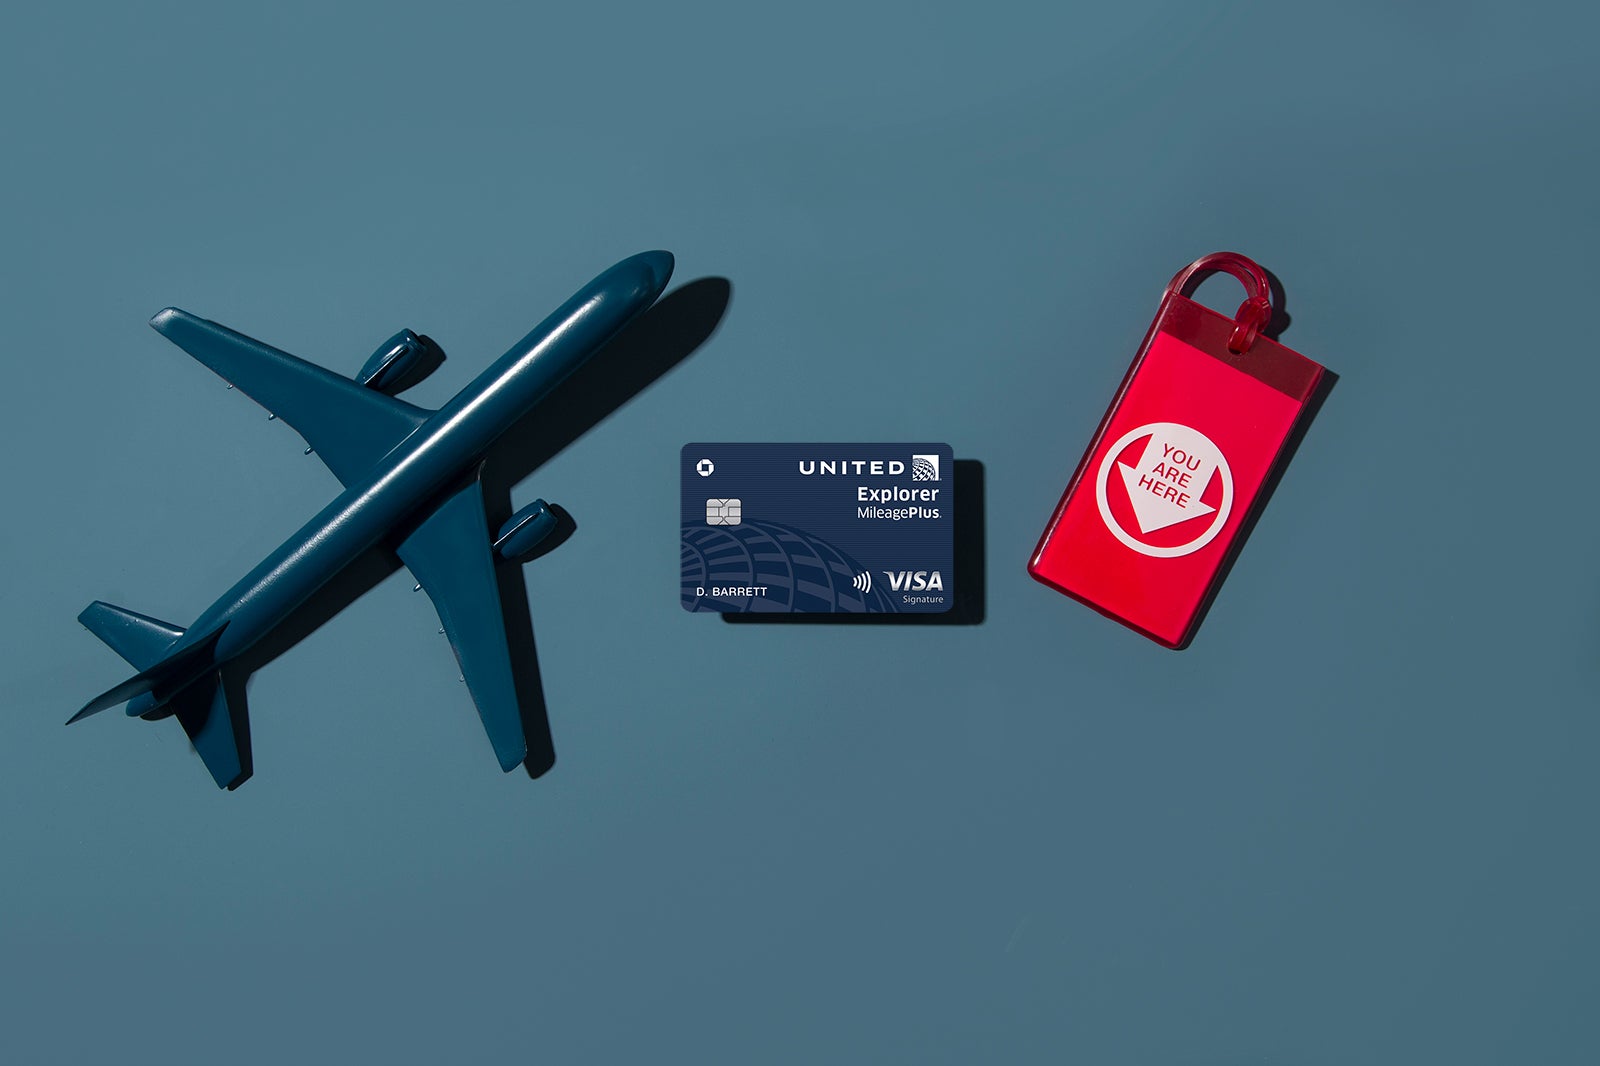 a credit card between a model plane and luggage tag